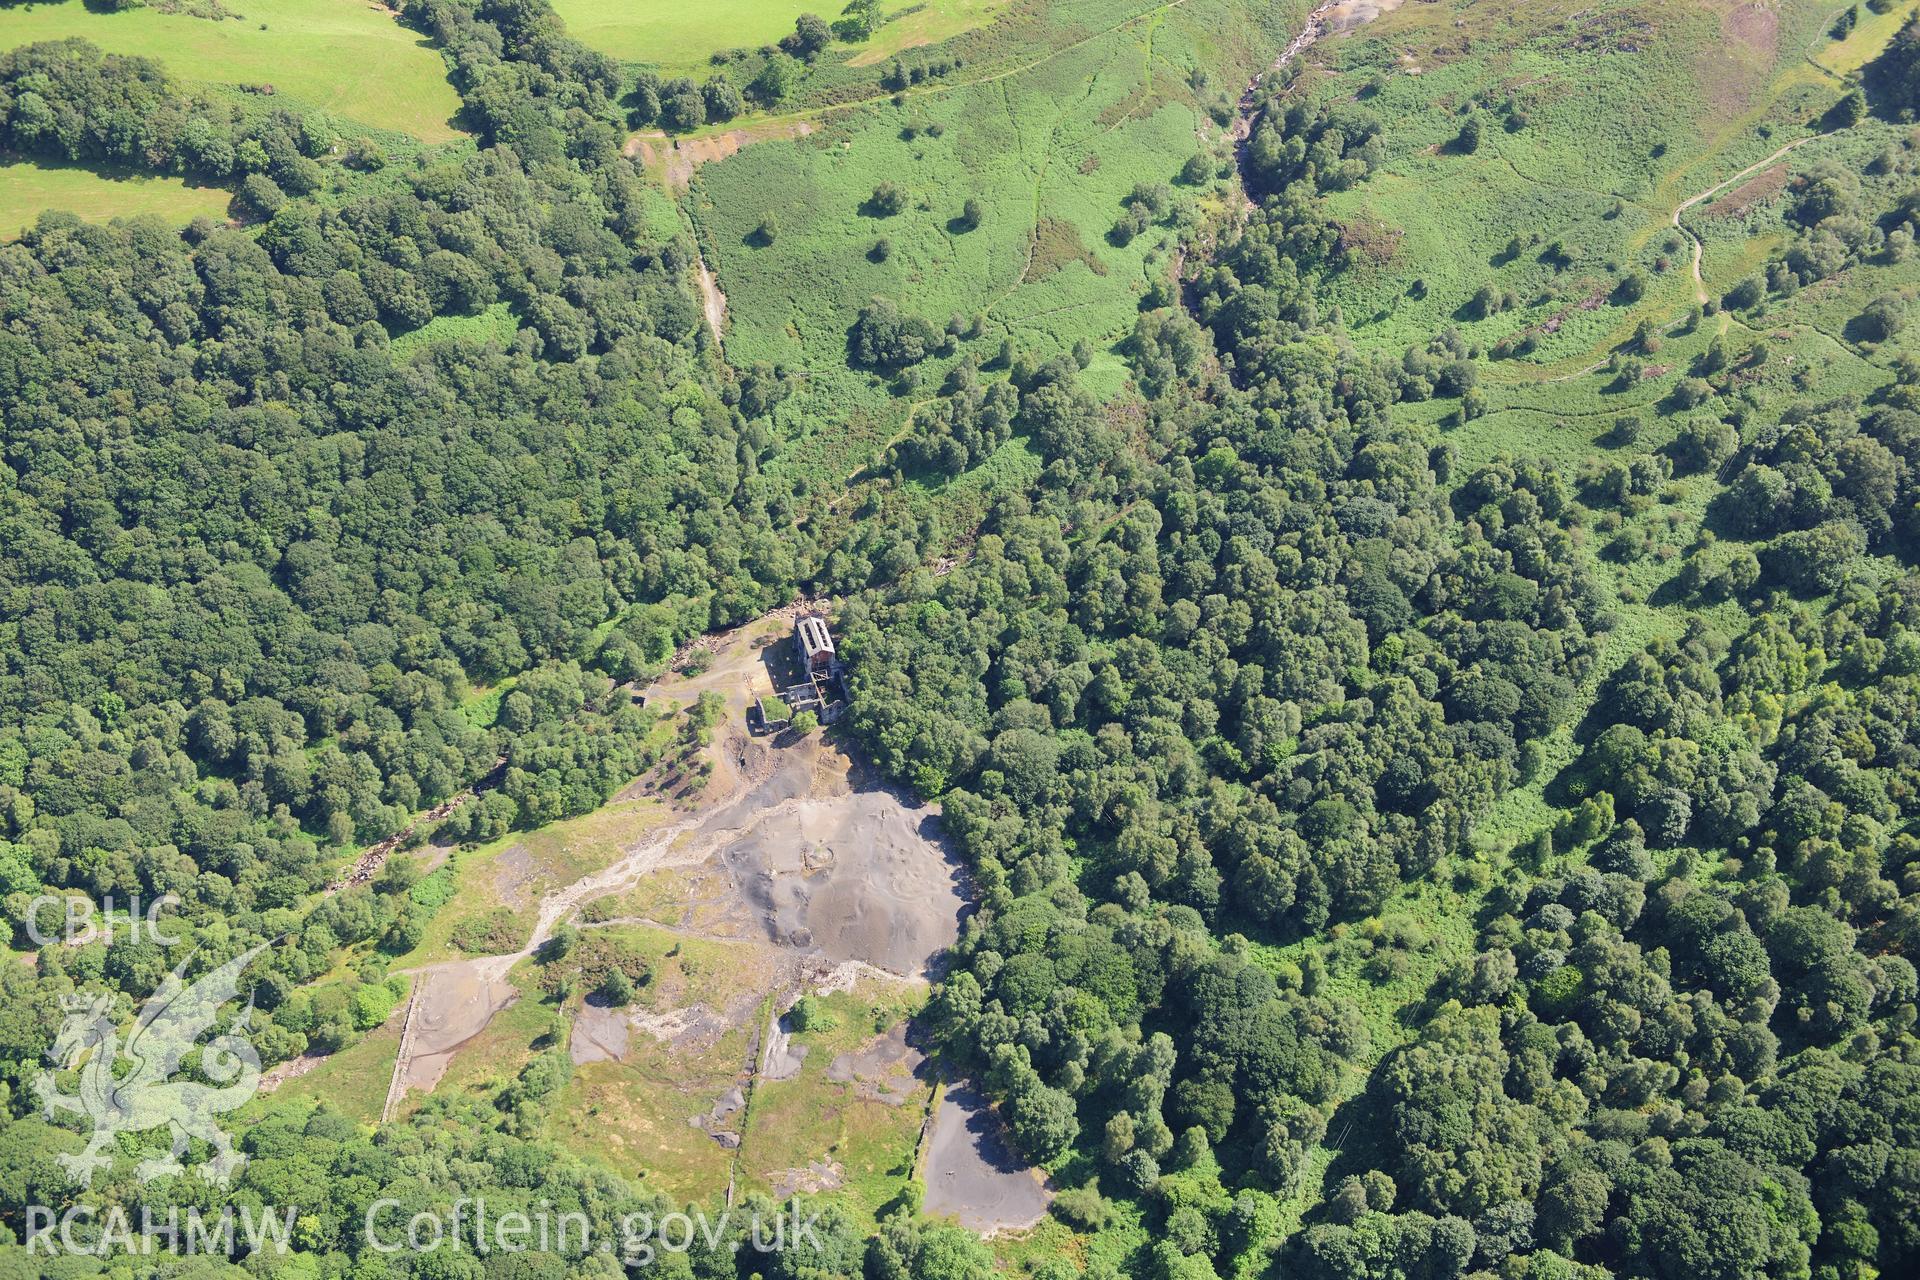 RCAHMW colour oblique photograph of Klondyke lead mine, viewed from the north-west. Taken by Toby Driver on 10/08/2012.